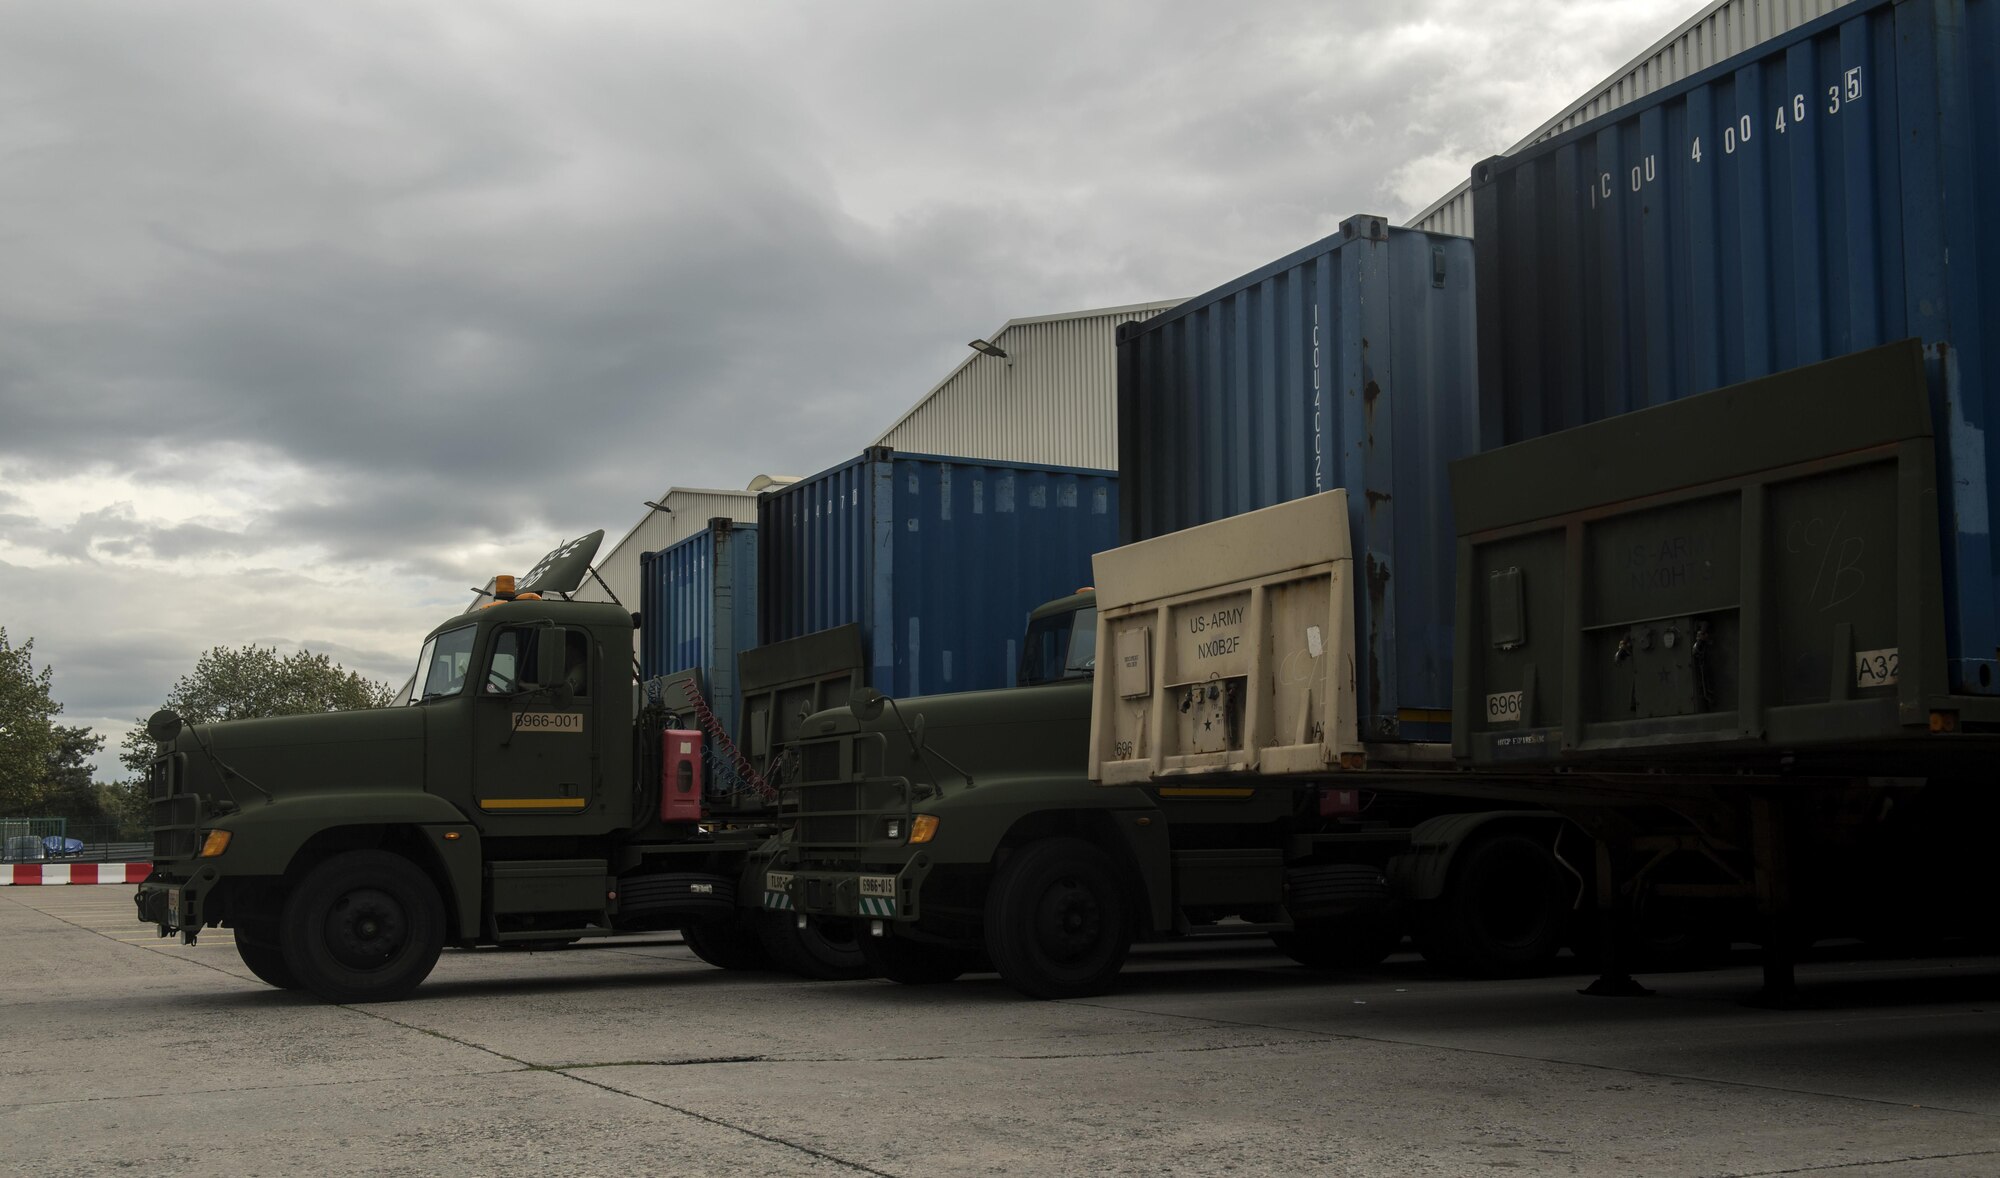 U.S. Army trucks wait to be loaded with mail for servicemembers stationed within the European theater in Frankfurt, Germany, Oct. 5, 2017. The U.S. Air Forces in Europe and Air Forces Africa Air Postal Squadron works alongside the Army to provide air and ground transportation for mail delivered throughout Europe. (U.S. Air Force photo by Senior Airman Tryphena Mayhugh)